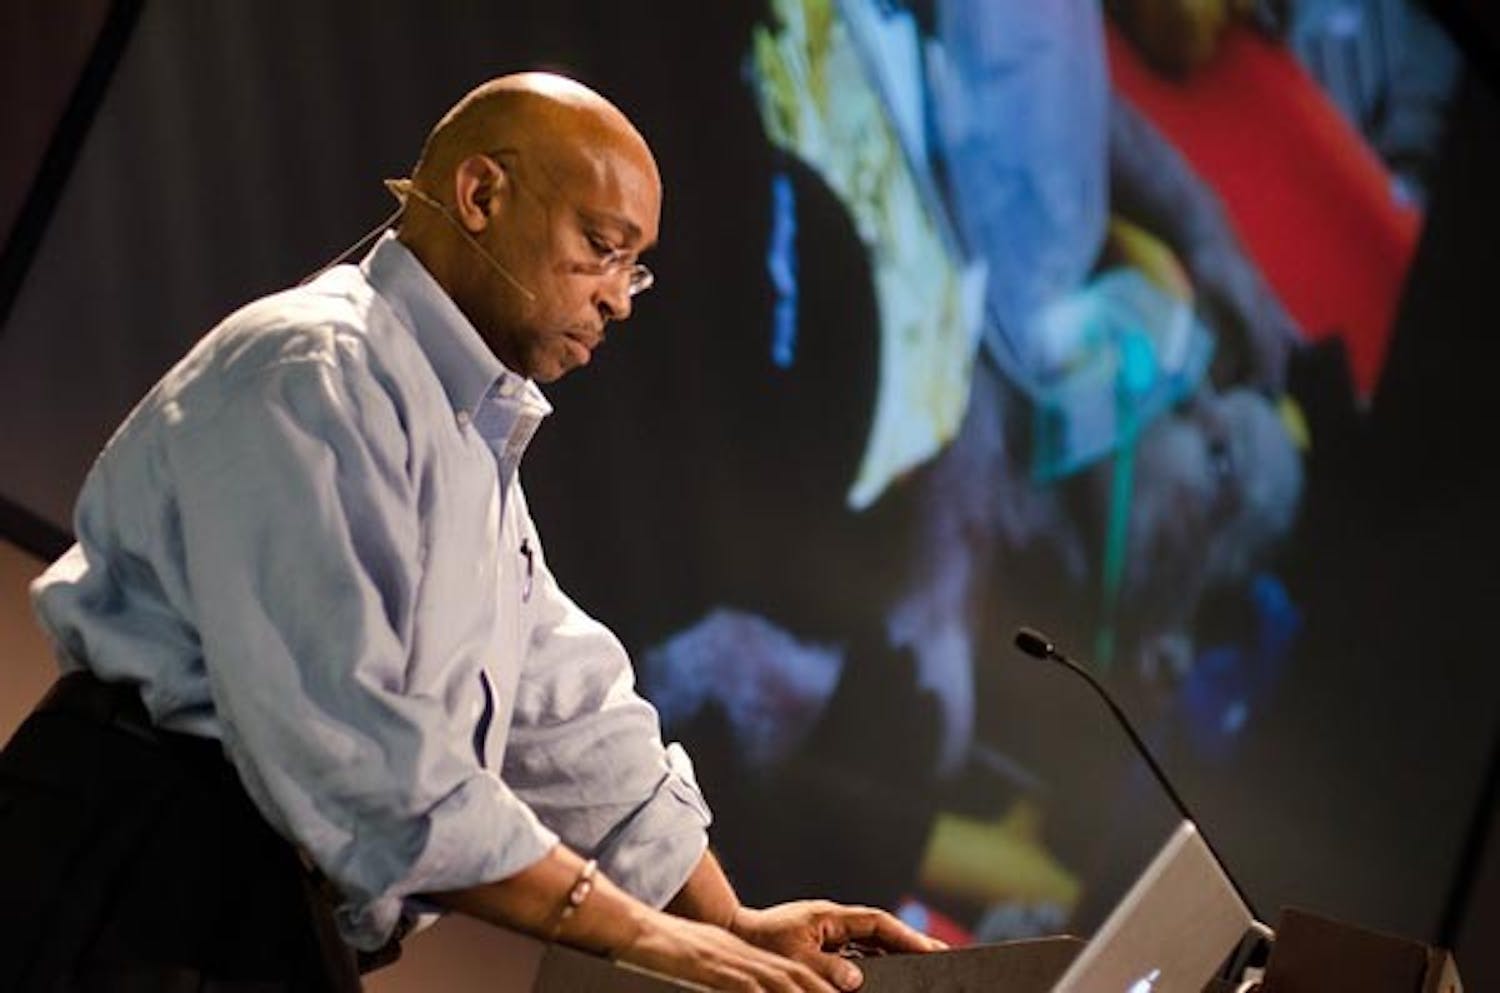 MUST SEE MONDAY: Pulitzer prize-winnig and Washington Post photographer Michel du Cille spoke about the power of photojournalism at the Walter Cronkite School of Journalism and Mass Communication on the downtown campus Monday night.  (Photo by Aaron Lavinksy)